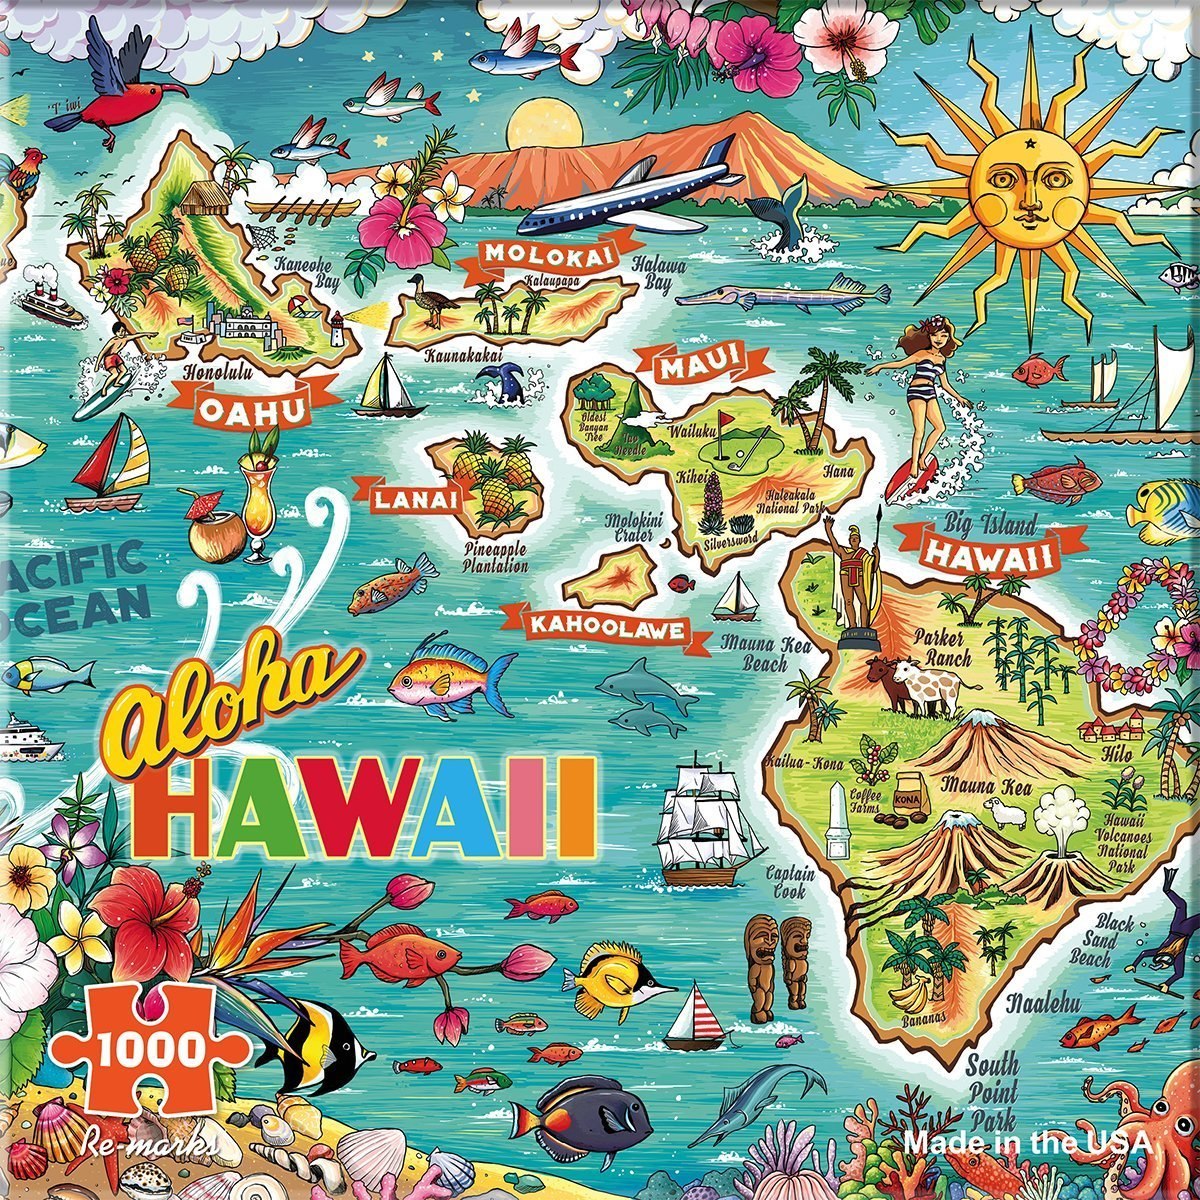 Hawaii - 1000pc Jigsaw Puzzle By Re-marks  			  					NEW